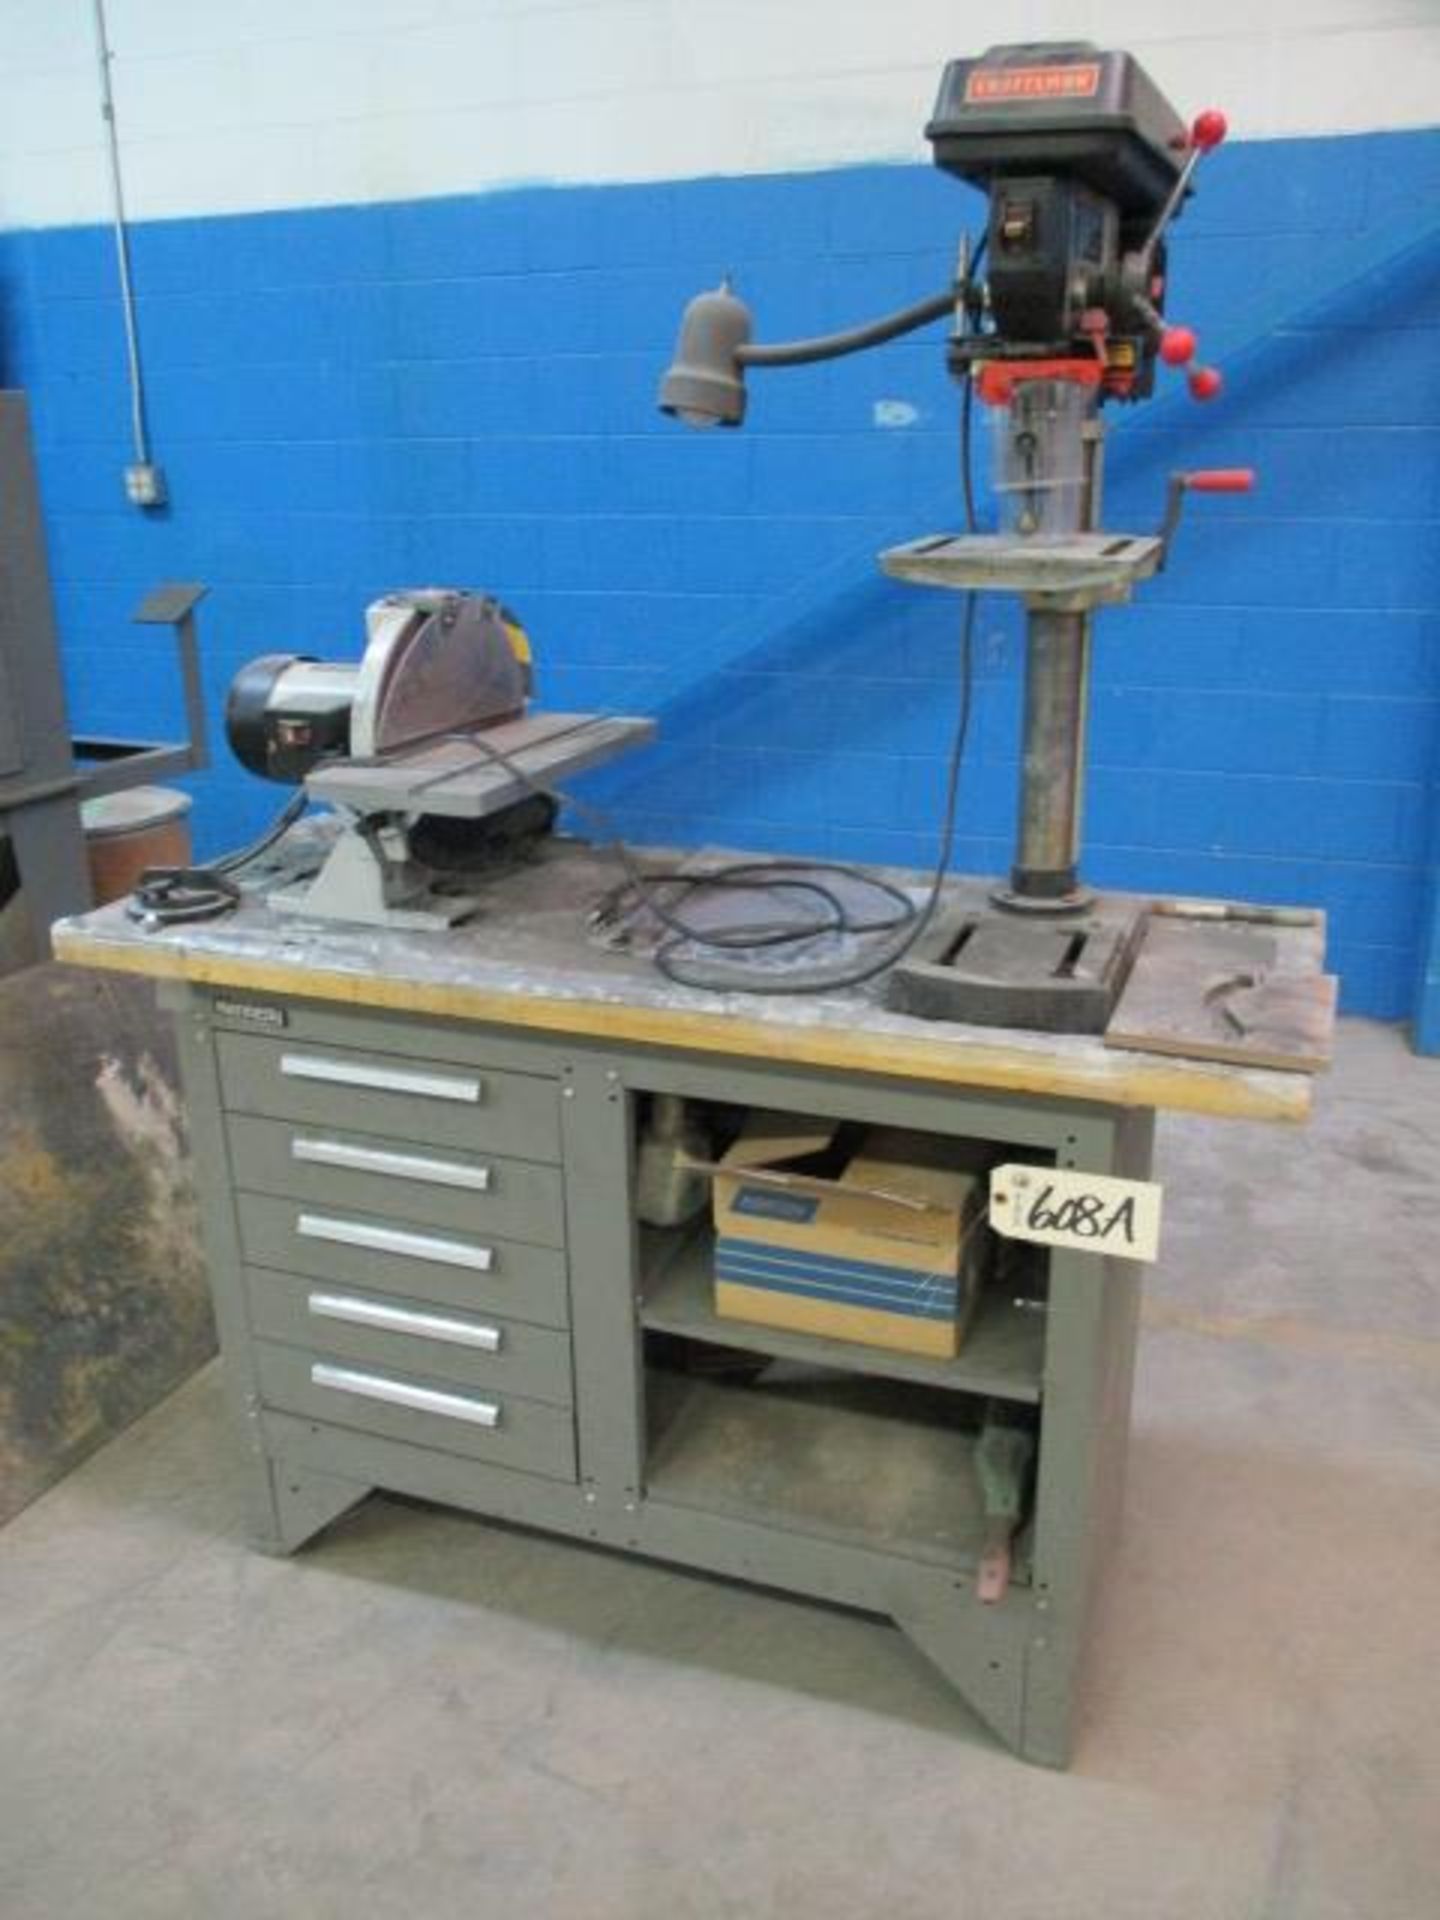 Kennedy Workbench with 12" Disc Grinder & 12" Drill Press